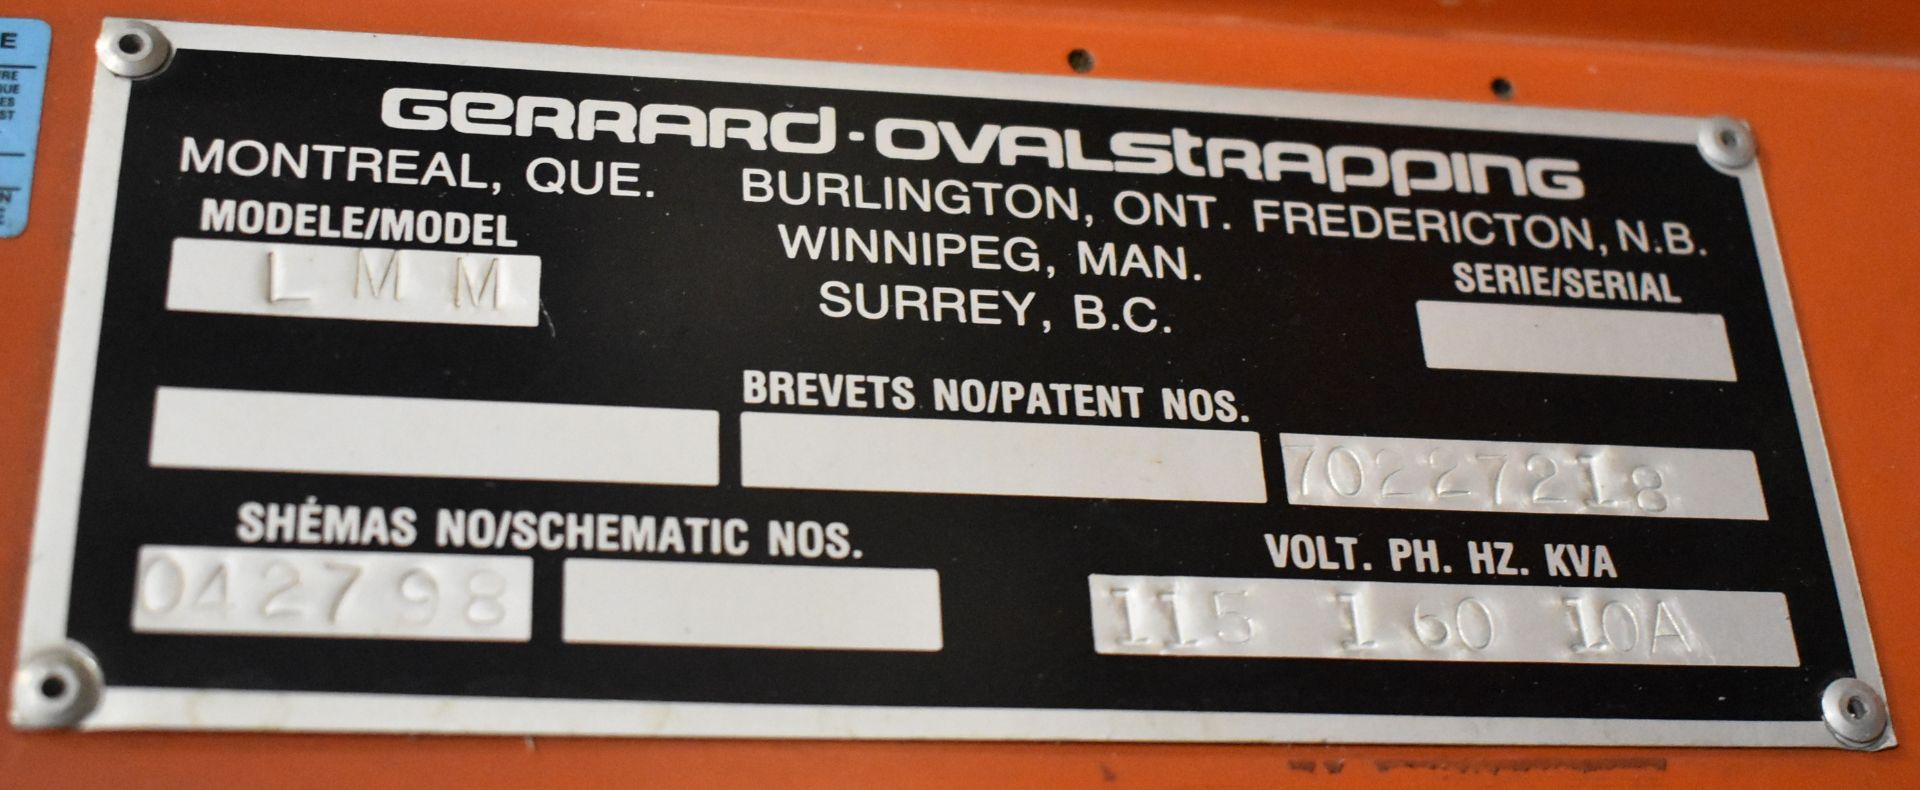 GERRARD-OVALSTRAPPING LLM PORTABLE STRAPPING/BANDING MACHINE (LOCATED IN BRAMPTON, ON) [RIGGING FEES - Image 3 of 3